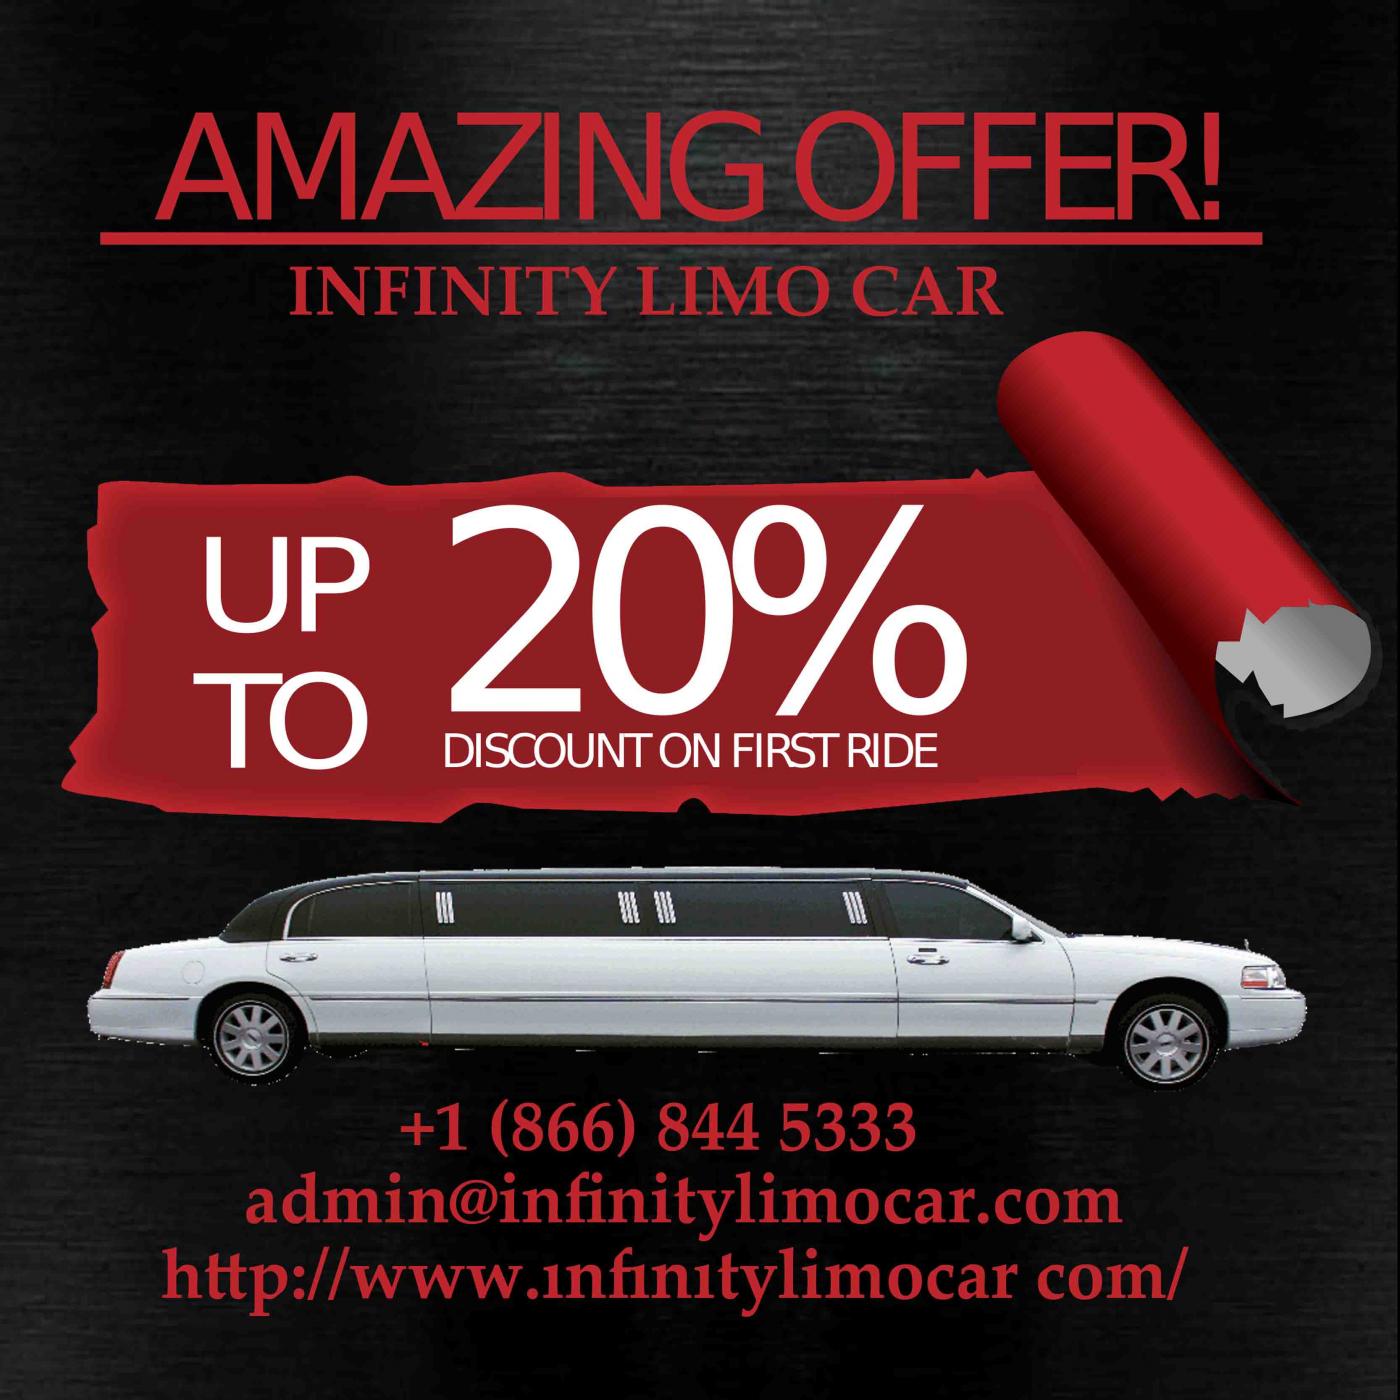 car and limousine service available at discounted rate